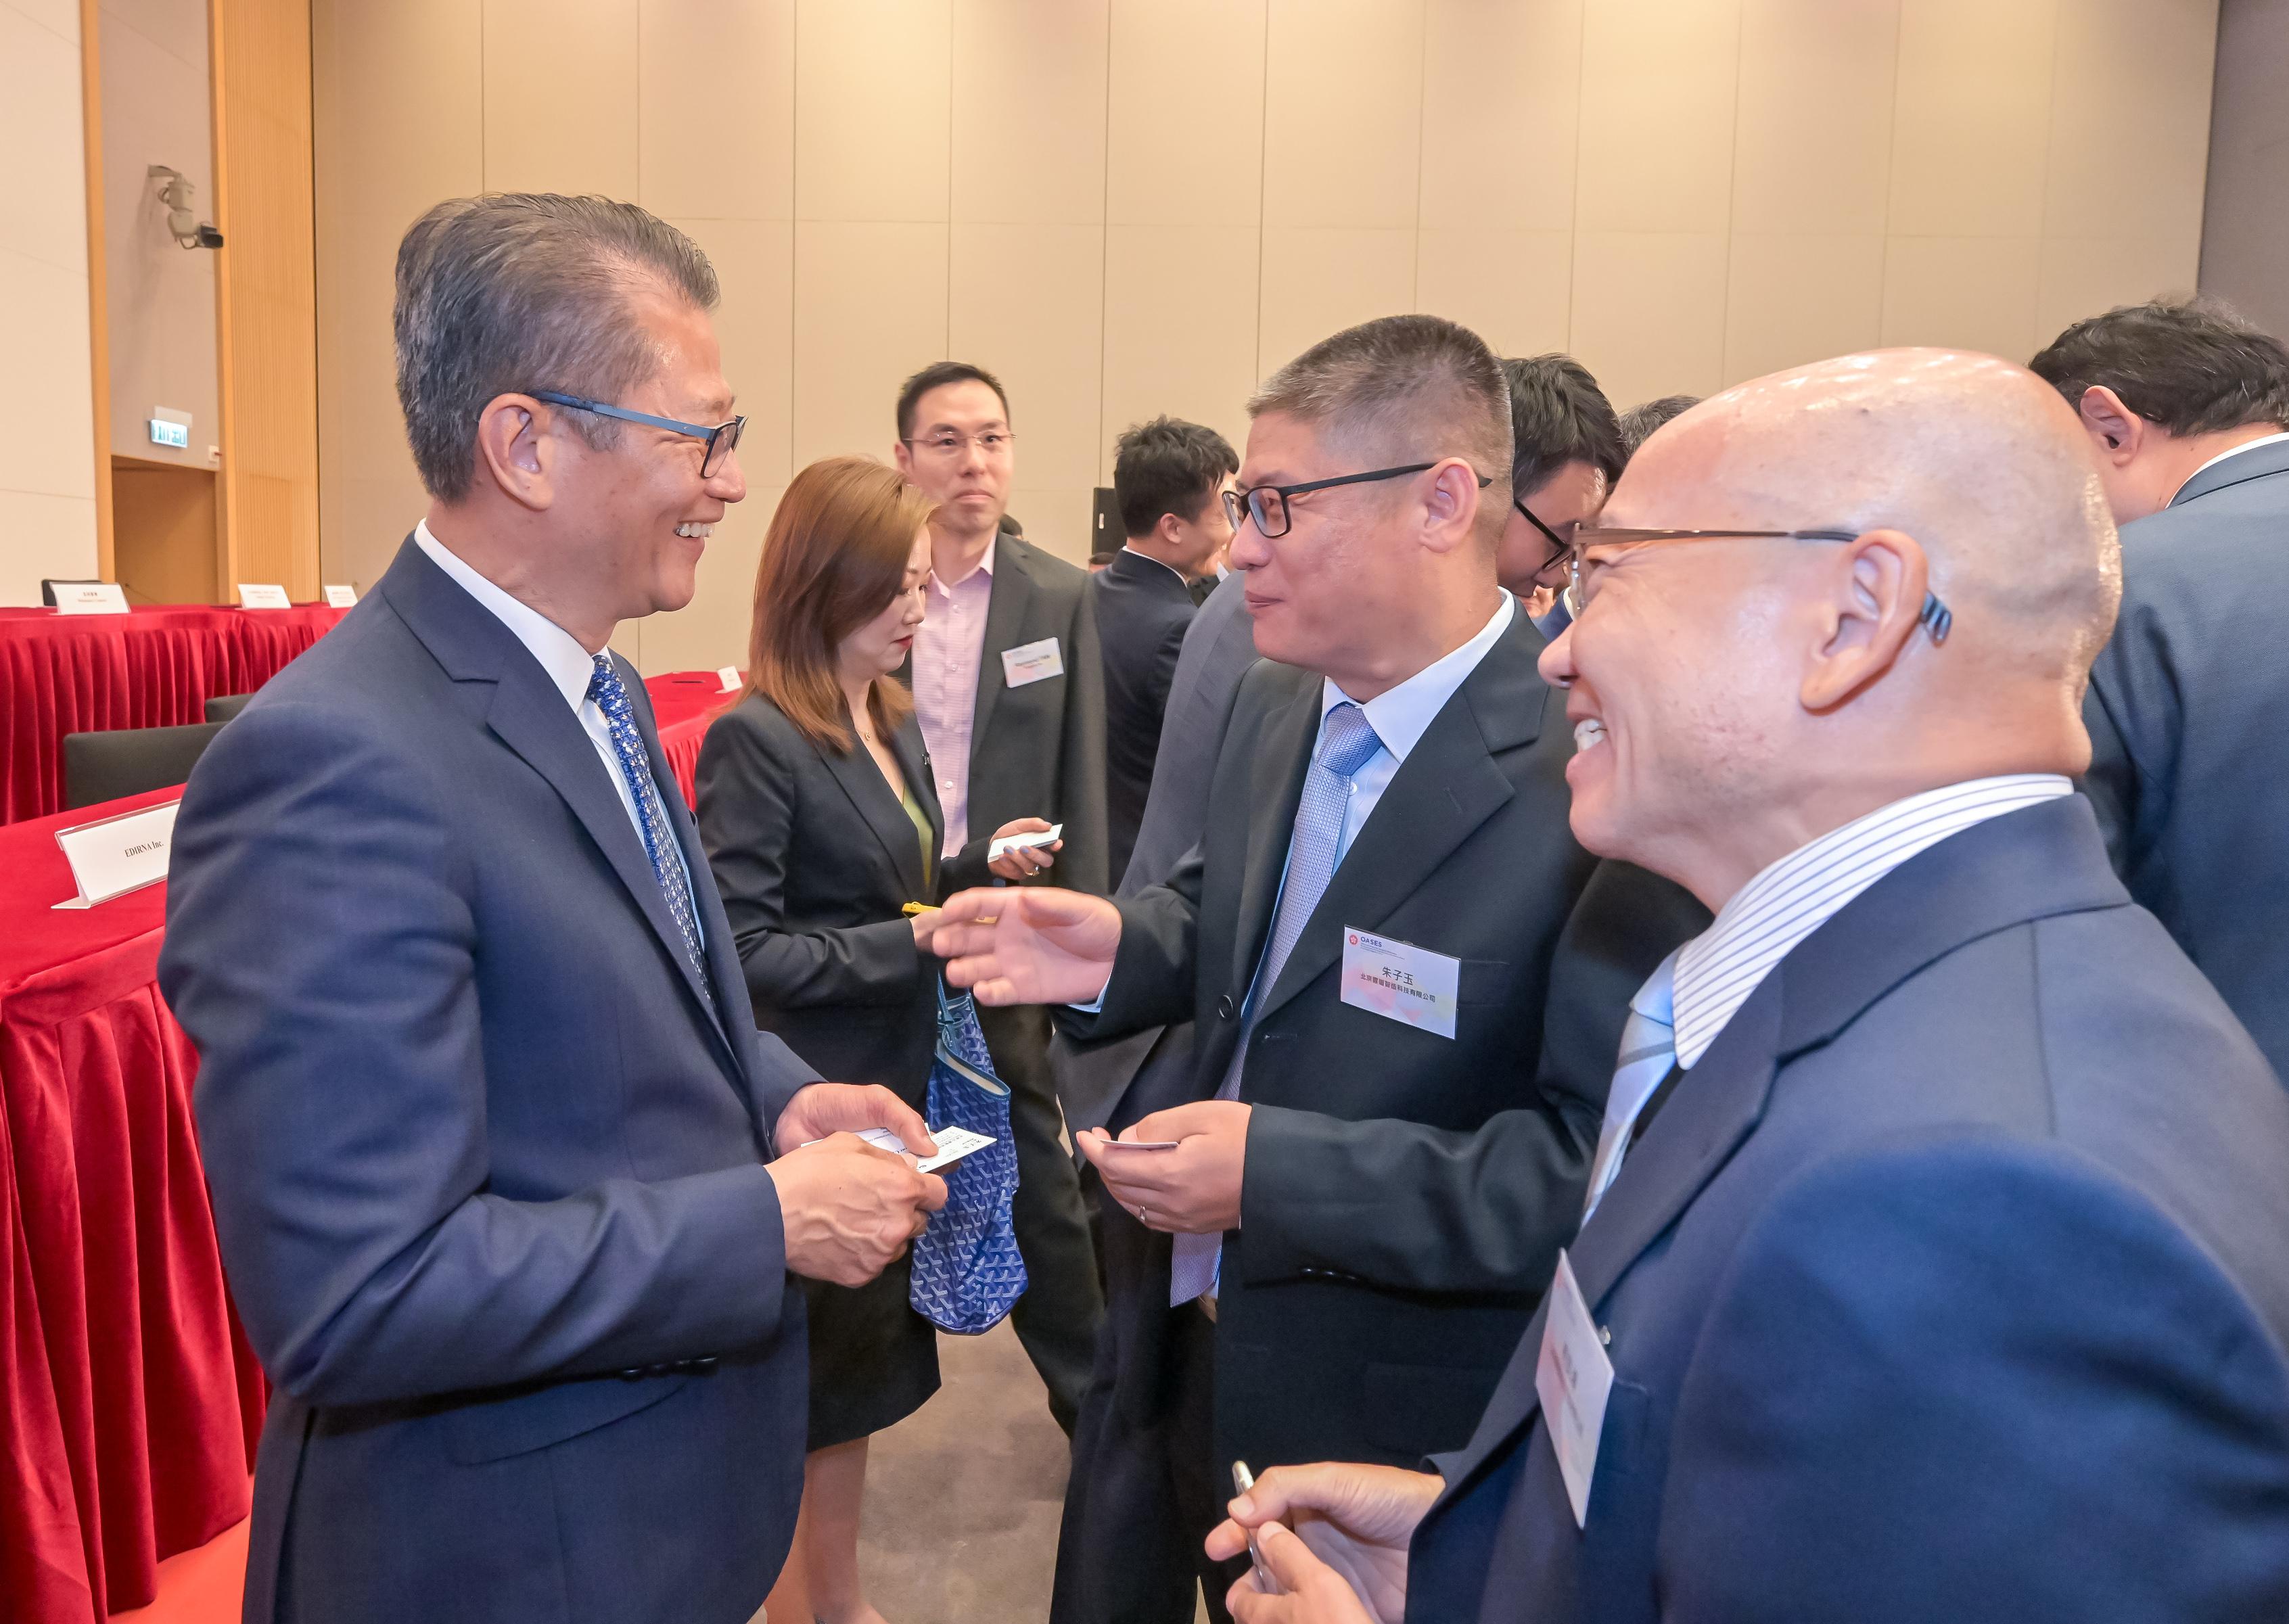 The Office for Attracting Attracting Strategic Enterprises (OASES) held the Launching Ceremony of OASES Partnership. Photo shows the Financial Secretary, Mr Paul Chan (first left), interacting with the representatives of strategic enterprises.